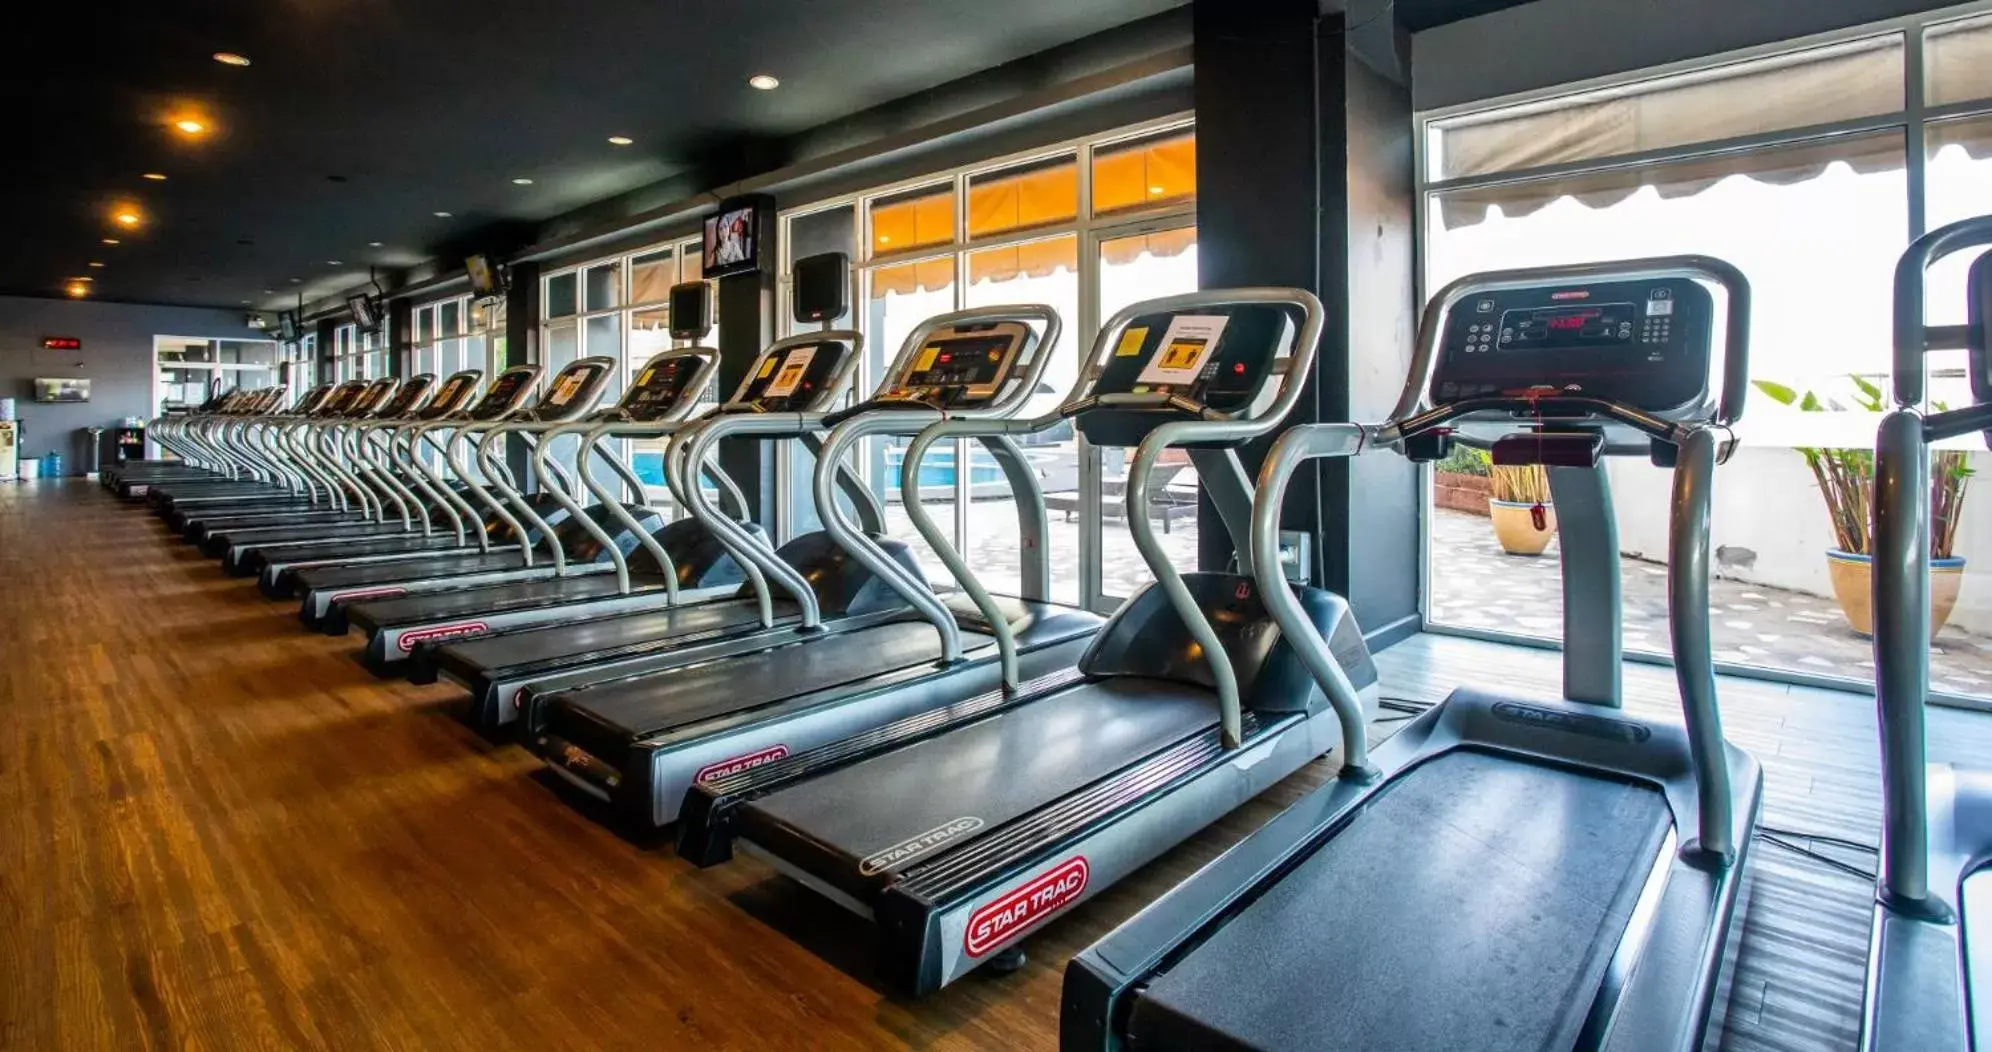 Fitness centre/facilities, Fitness Center/Facilities in Star Convention Hotel (Star Hotel)